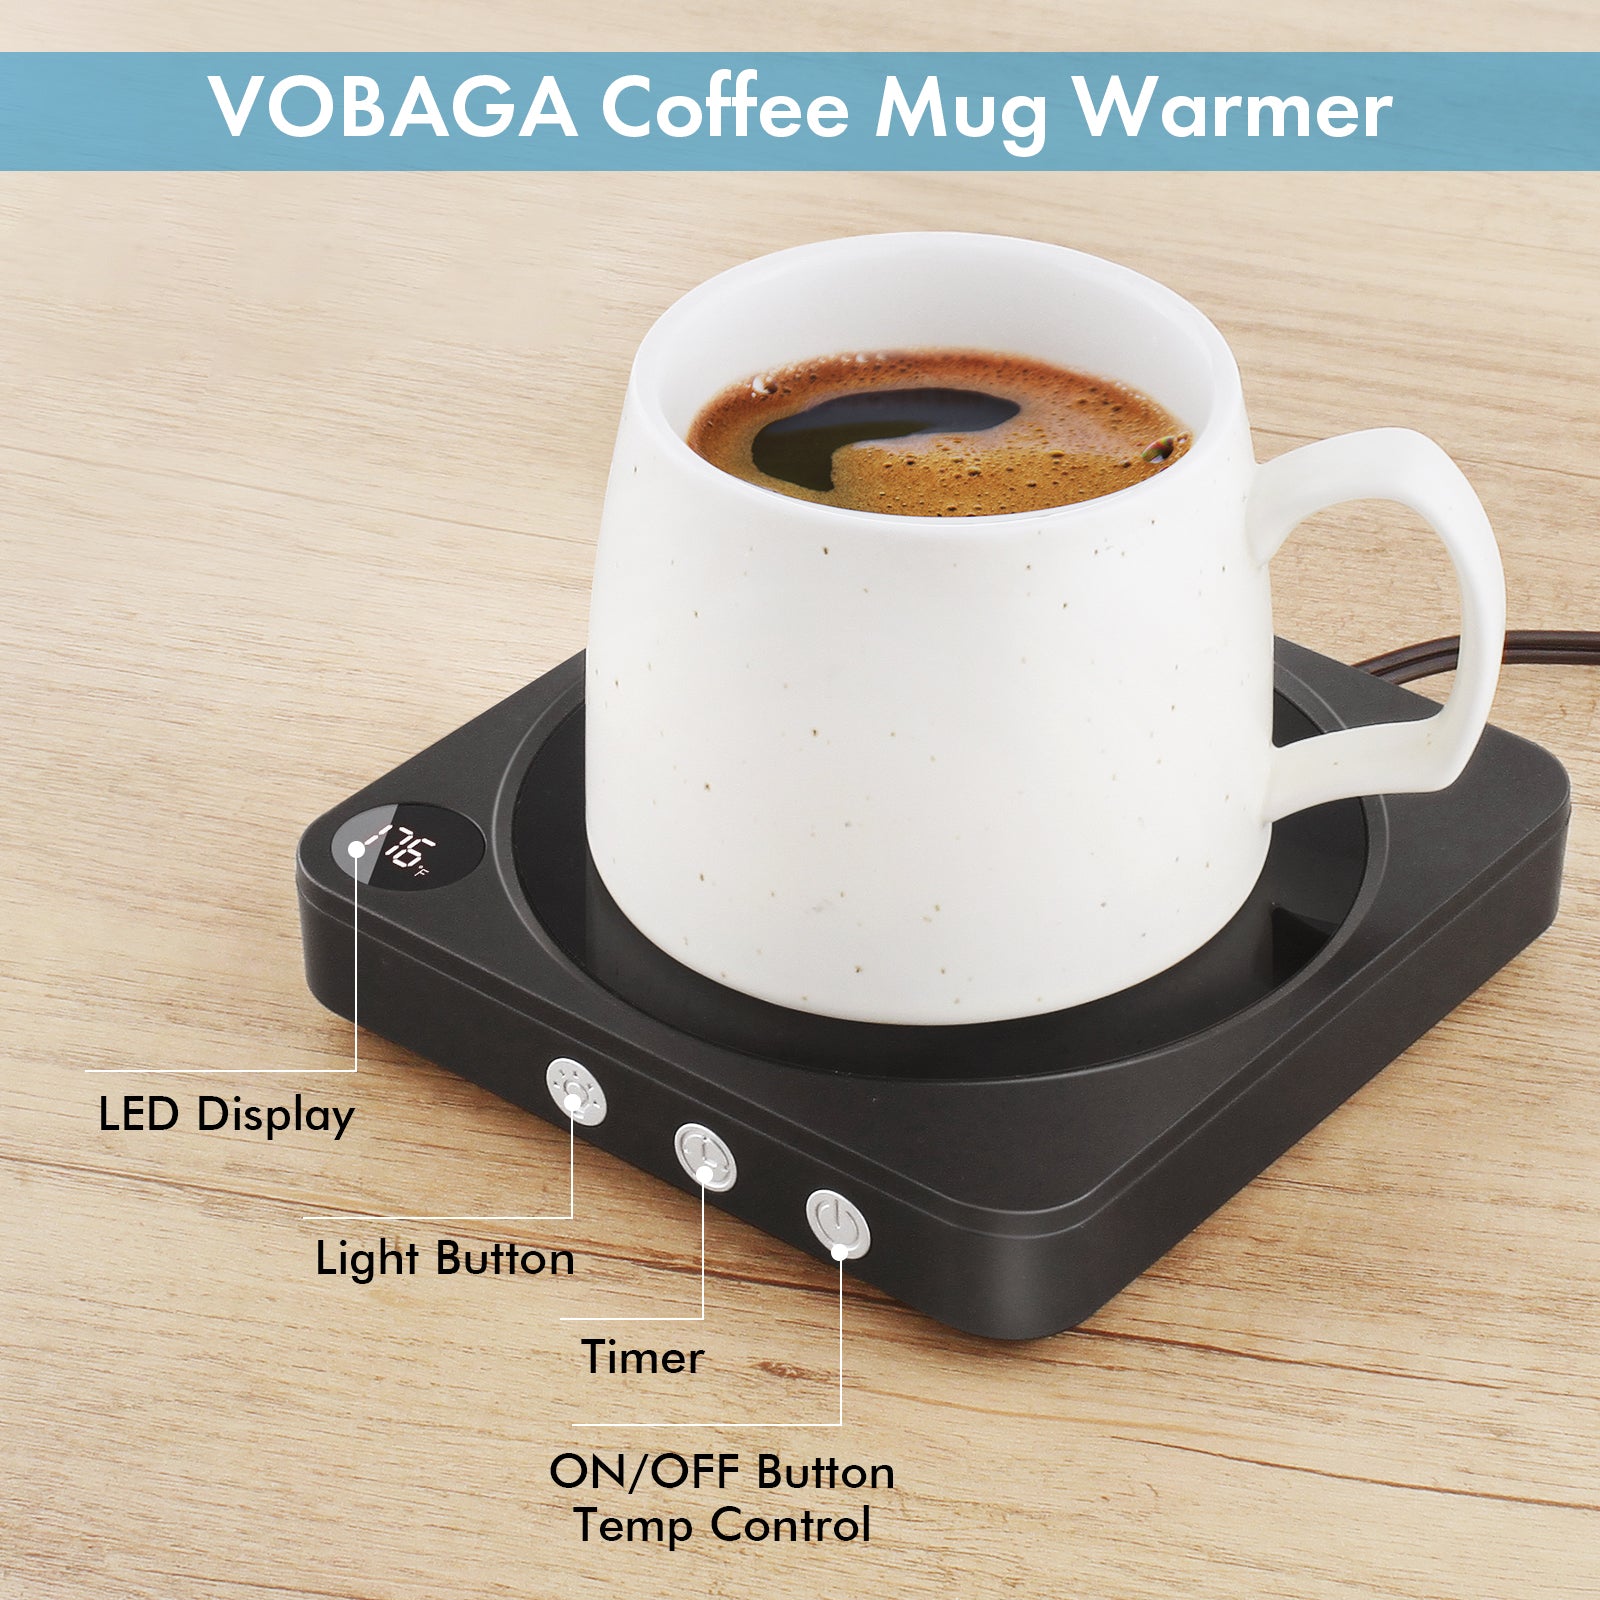 VOBAGA Coffee Mug Warmer with 5.2 inch Heating Plate, 3 Temperature Setting & Auto Shut Off Smart Cup Warmer for Desk, Beverage Warmer for Home & Office (Black)